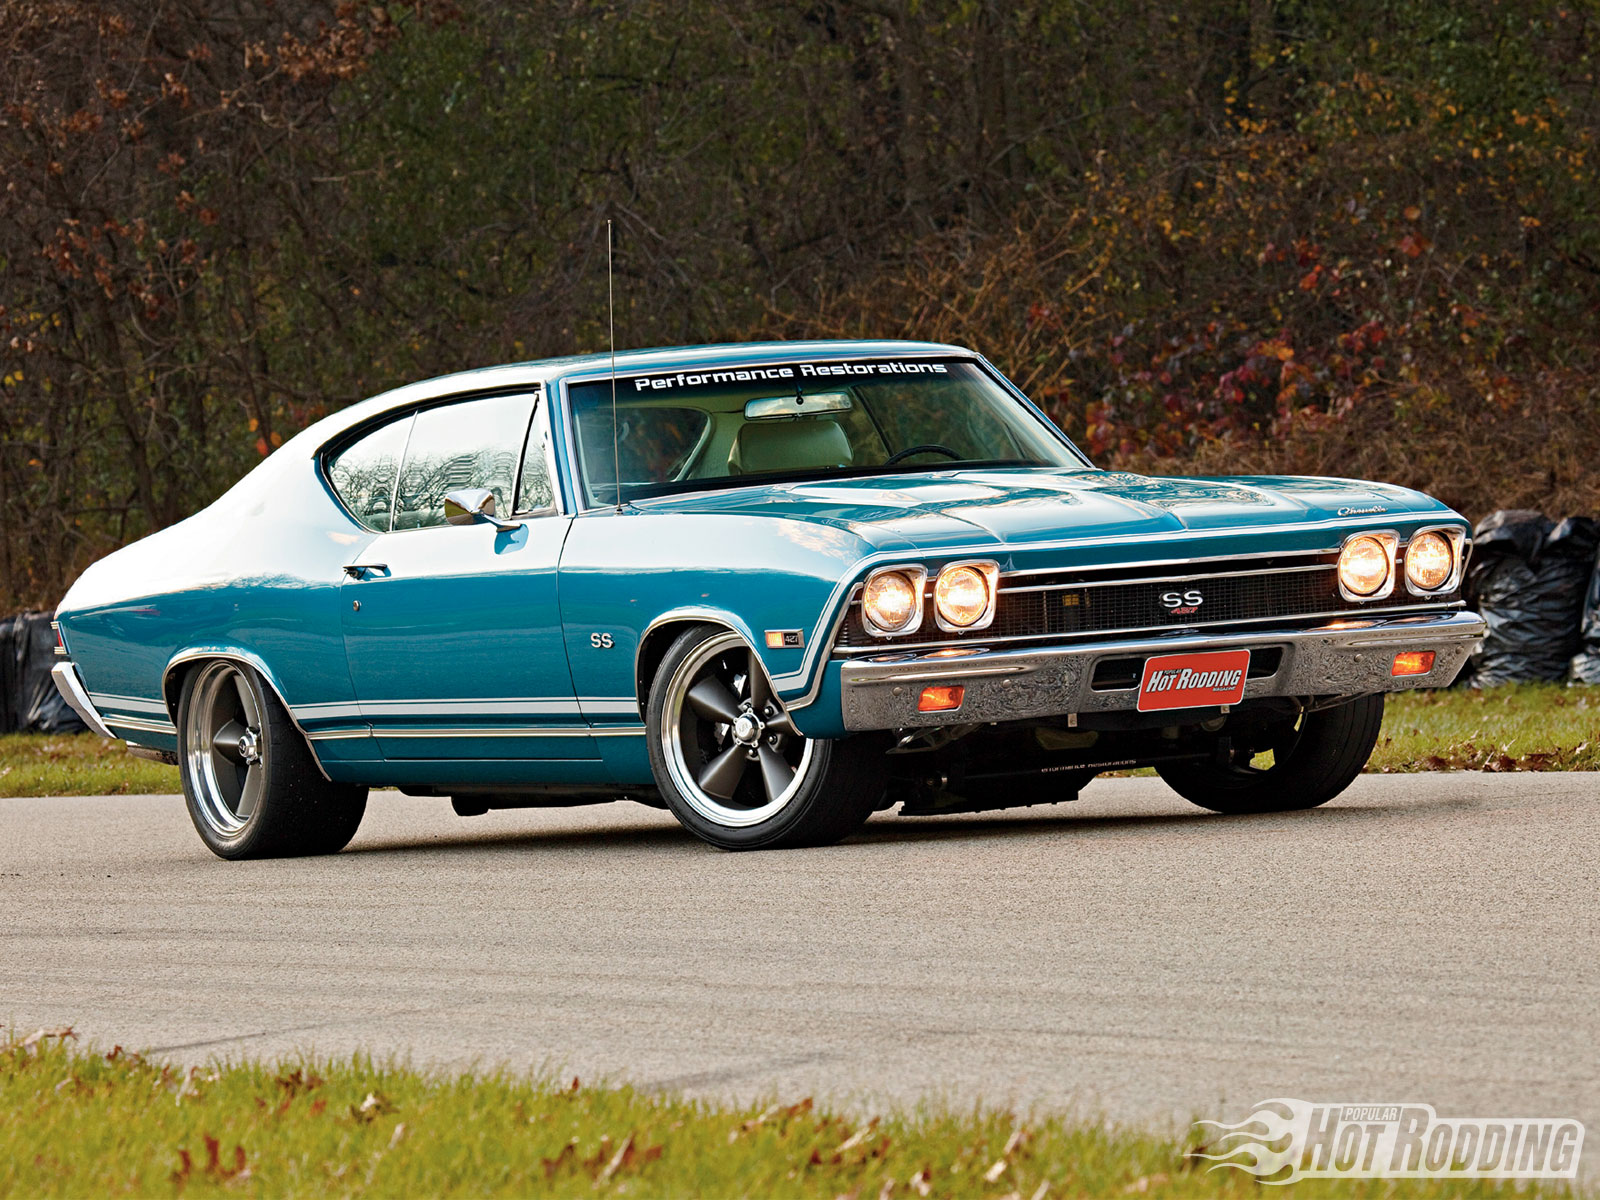 Chevy Chevelle SS 900 hp Computer Wallpapers Desktop Backgrounds